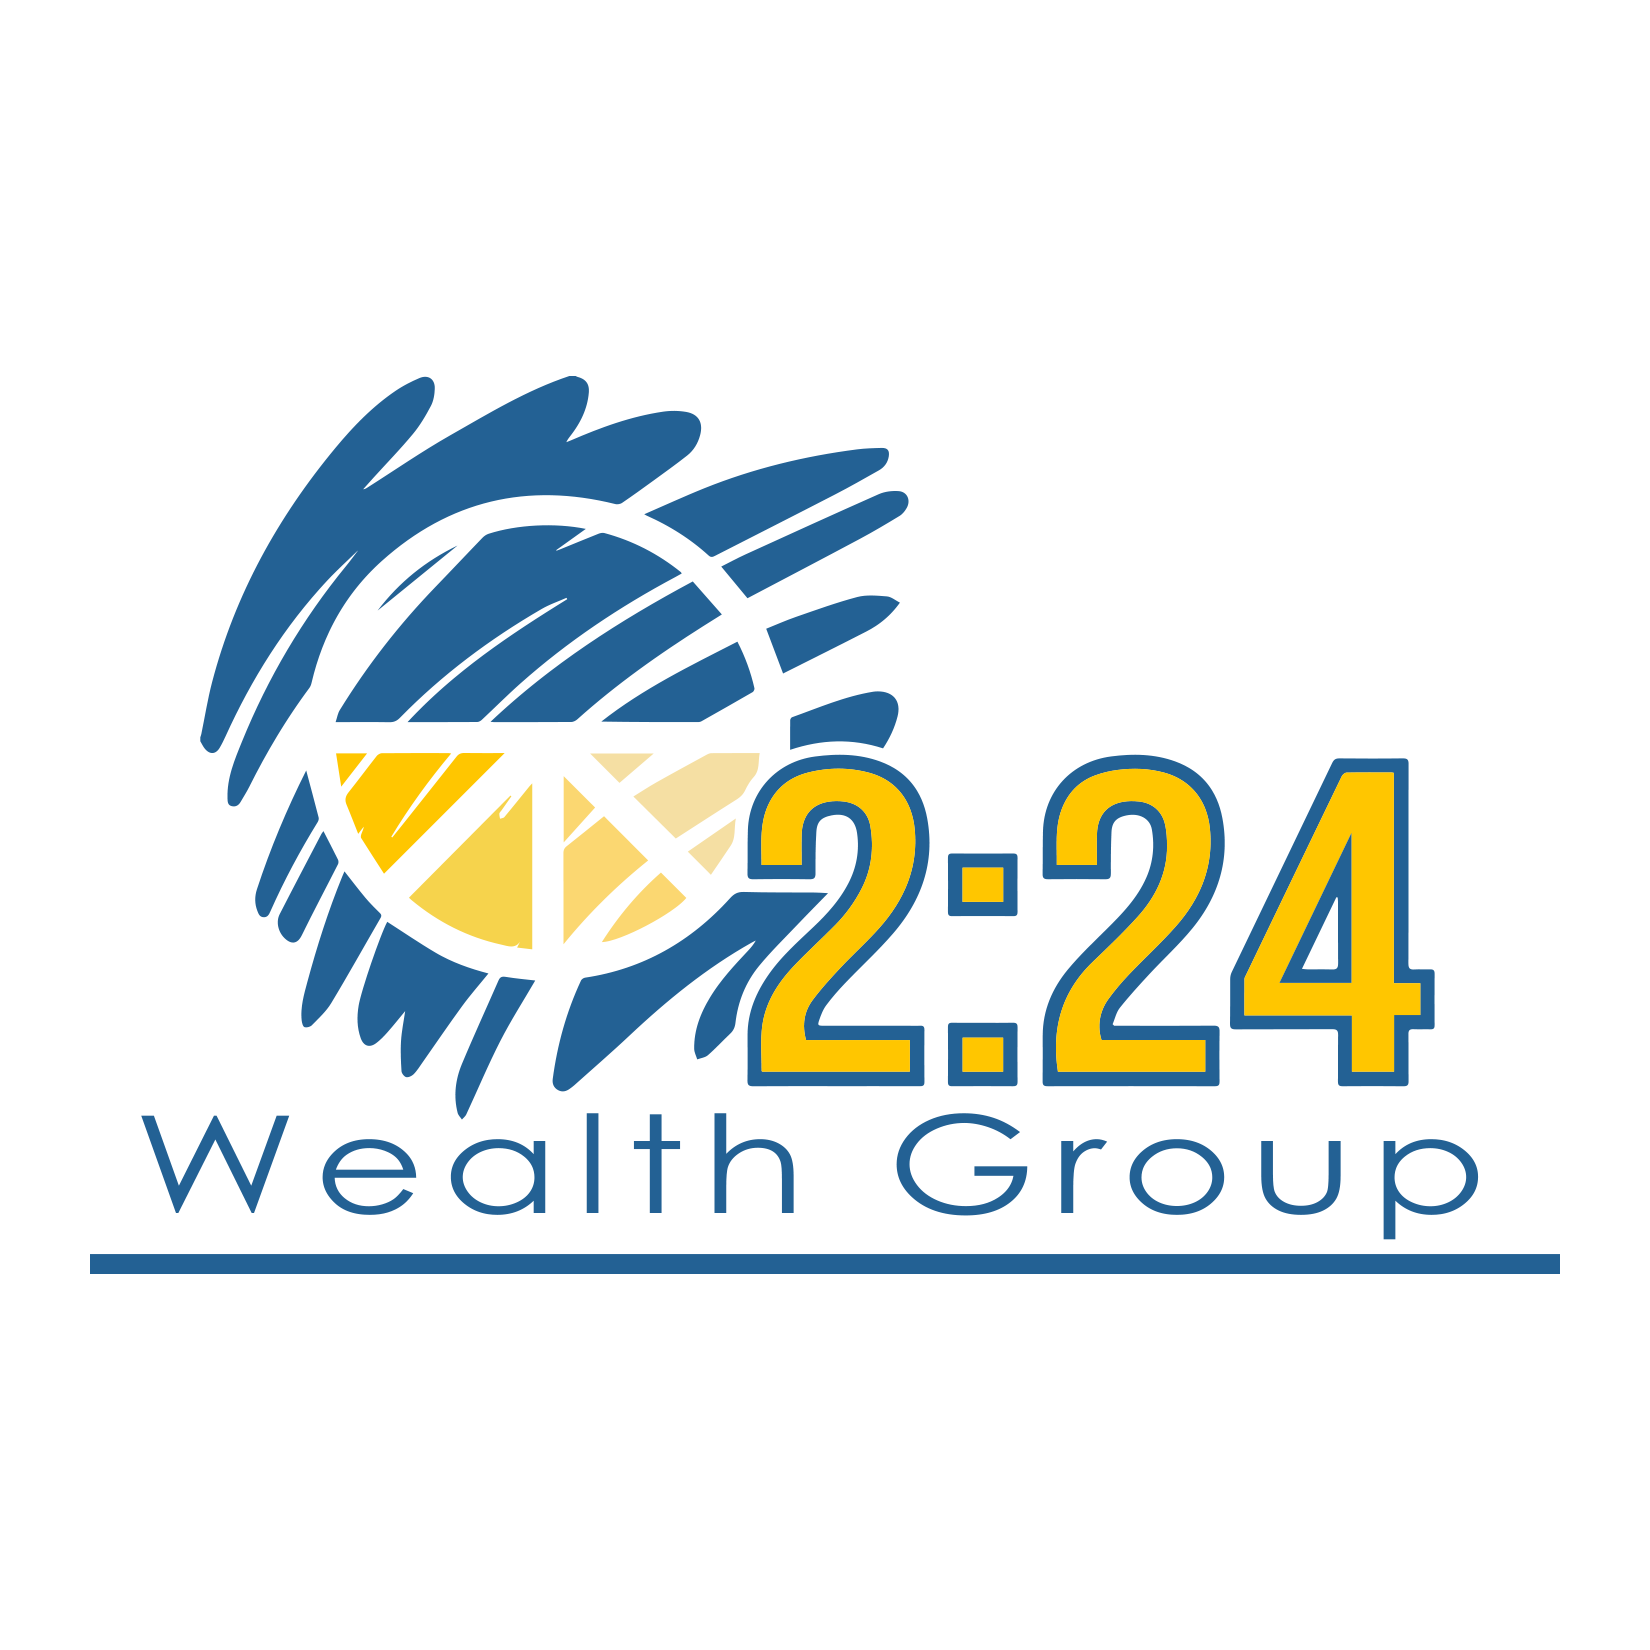 2:24 Wealth Group